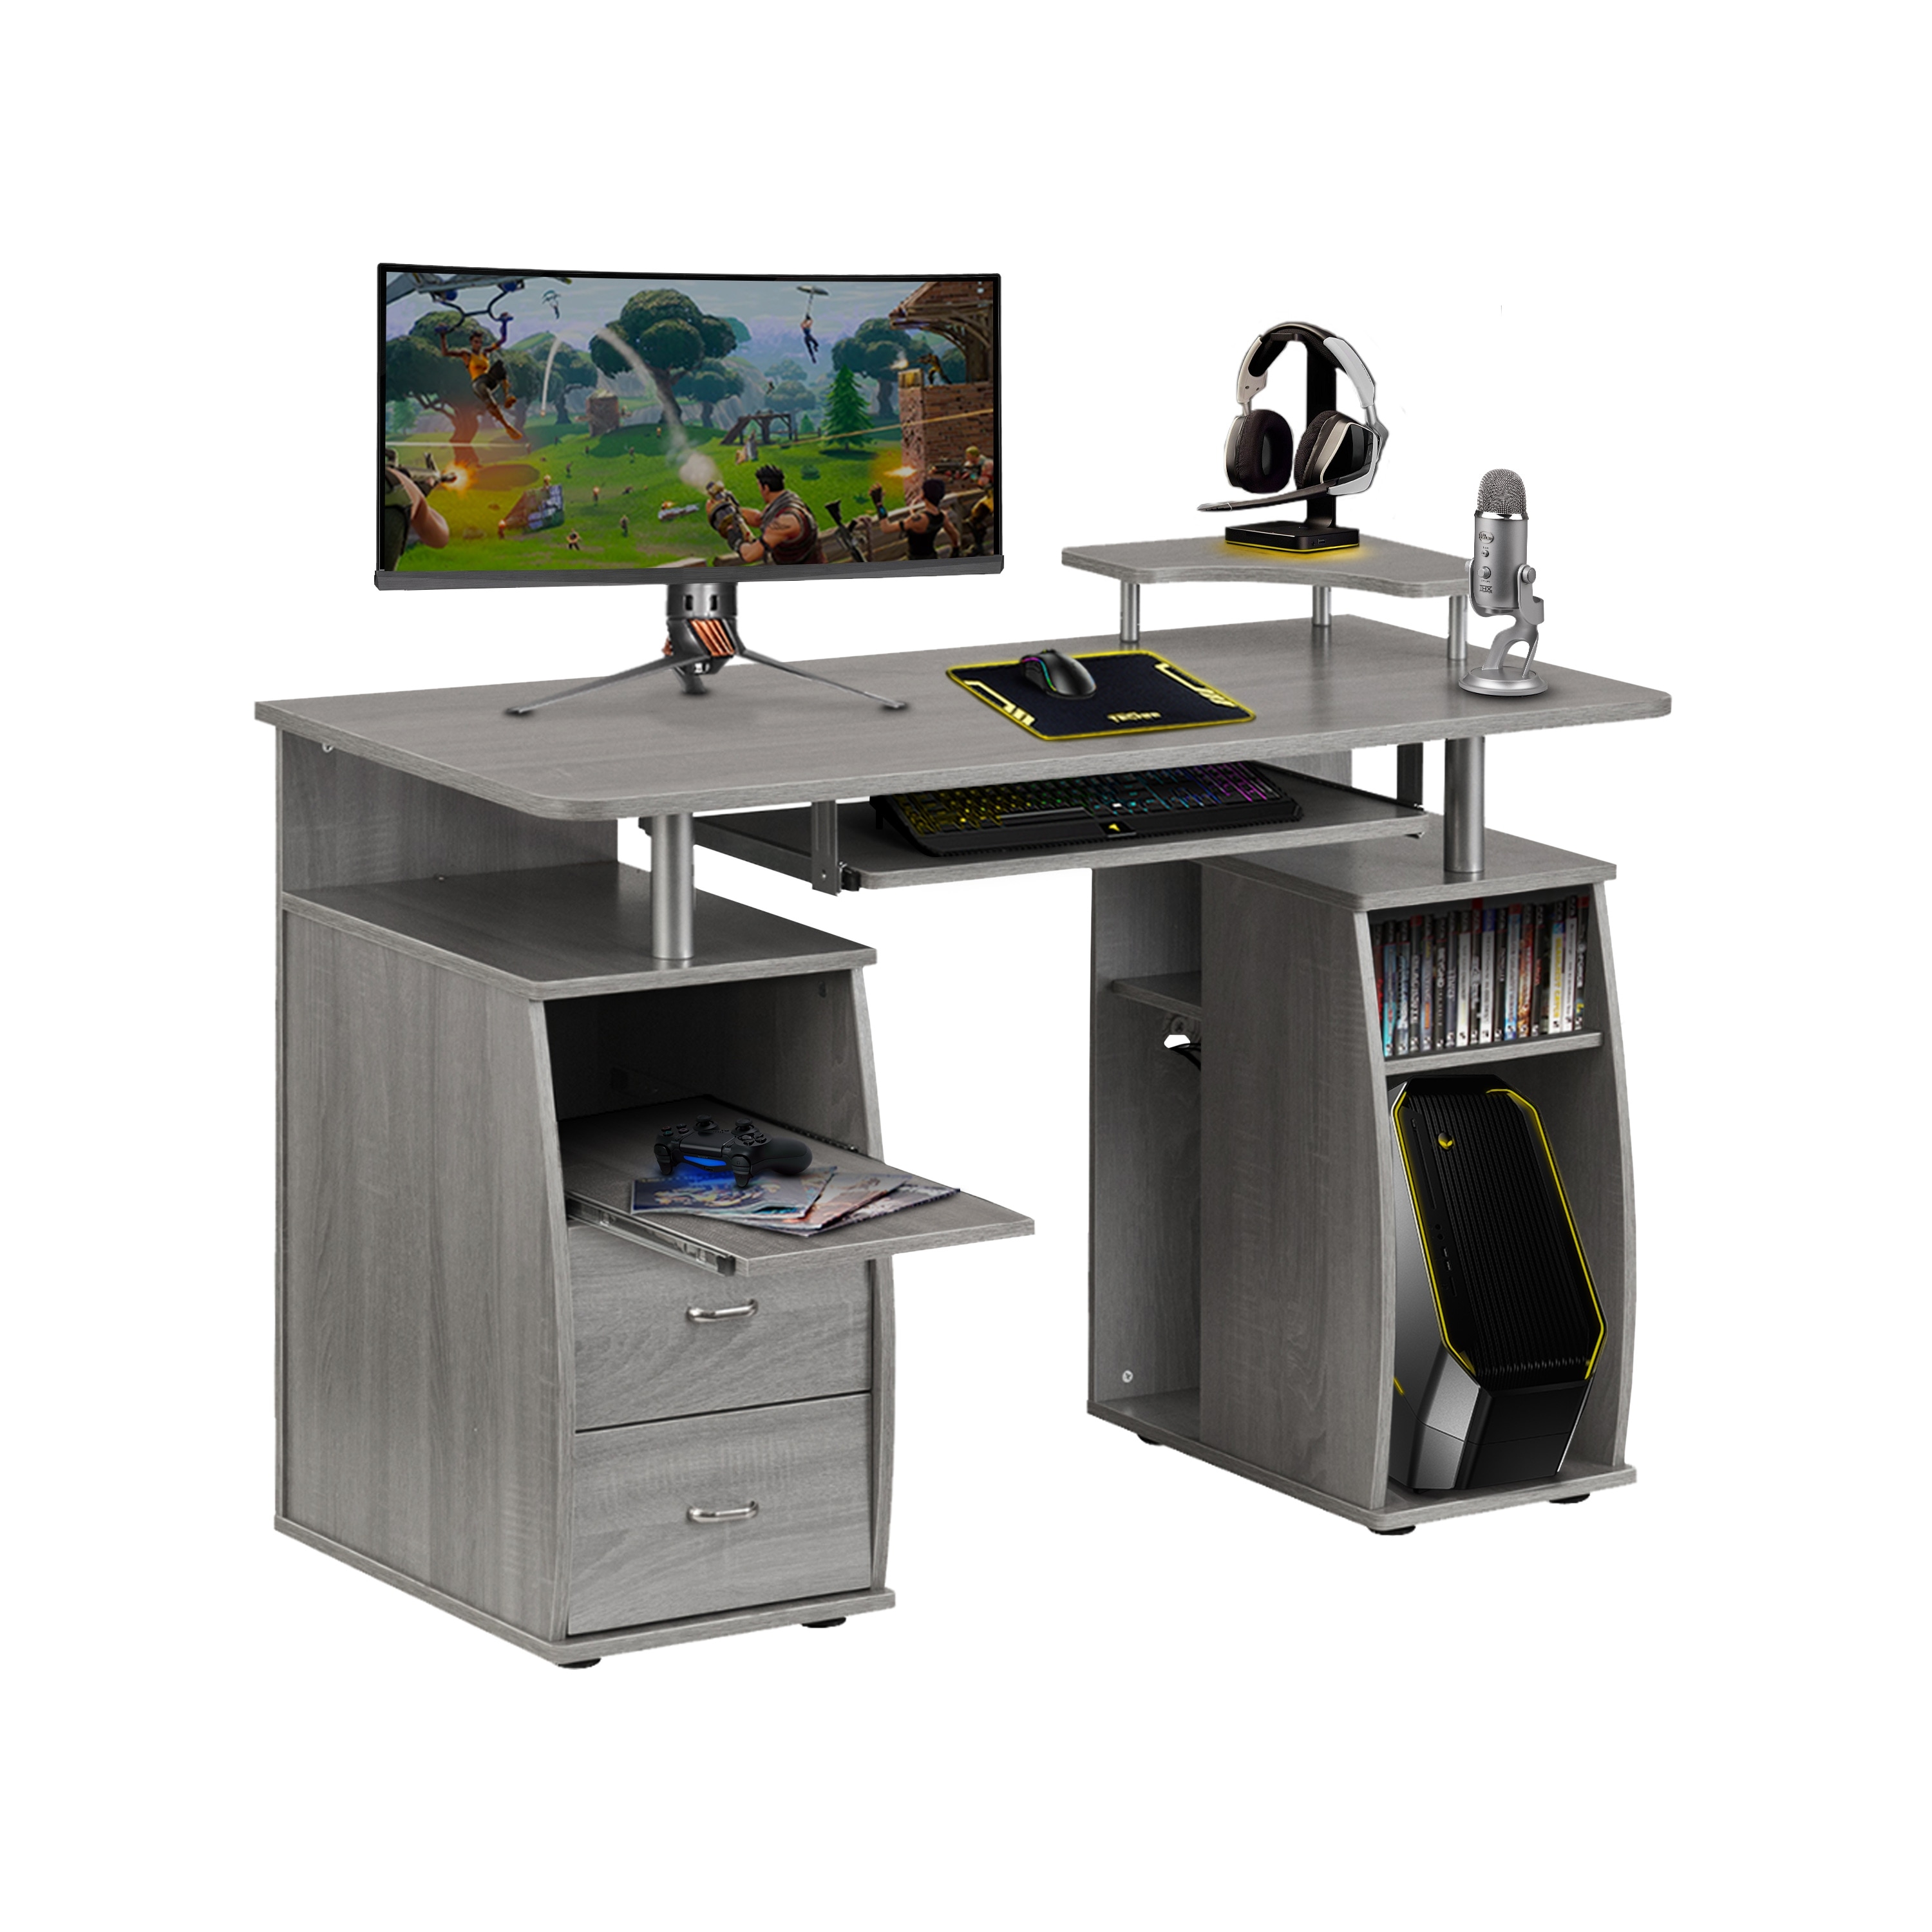 https://ak1.ostkcdn.com/images/products/is/images/direct/ec10c756ae4c81d460fbebd7321db2140d8a4781/Techni-Mobili-Complete-Computer-Workstation-Desk-With-Storage.jpg